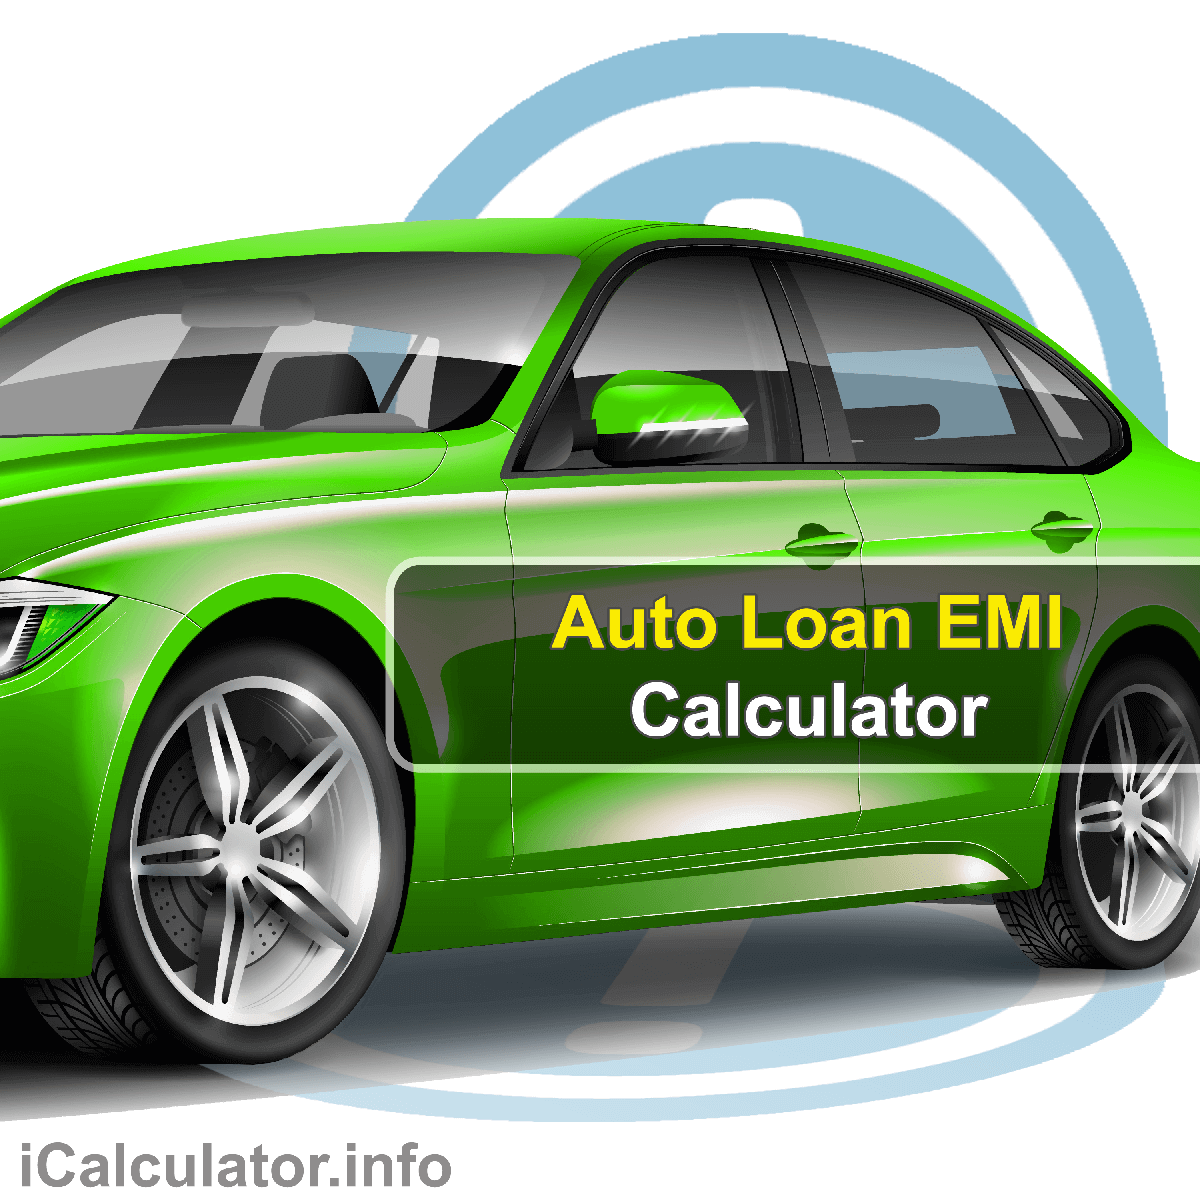 Auto Loan EMI Calculator. This image provides details of how to calculate auto loan EMI using a calculator and notepad. By using the EMI formula, the Auto Loan EMI Calculator provides a true calculation of the monthly repayments on your new or used car